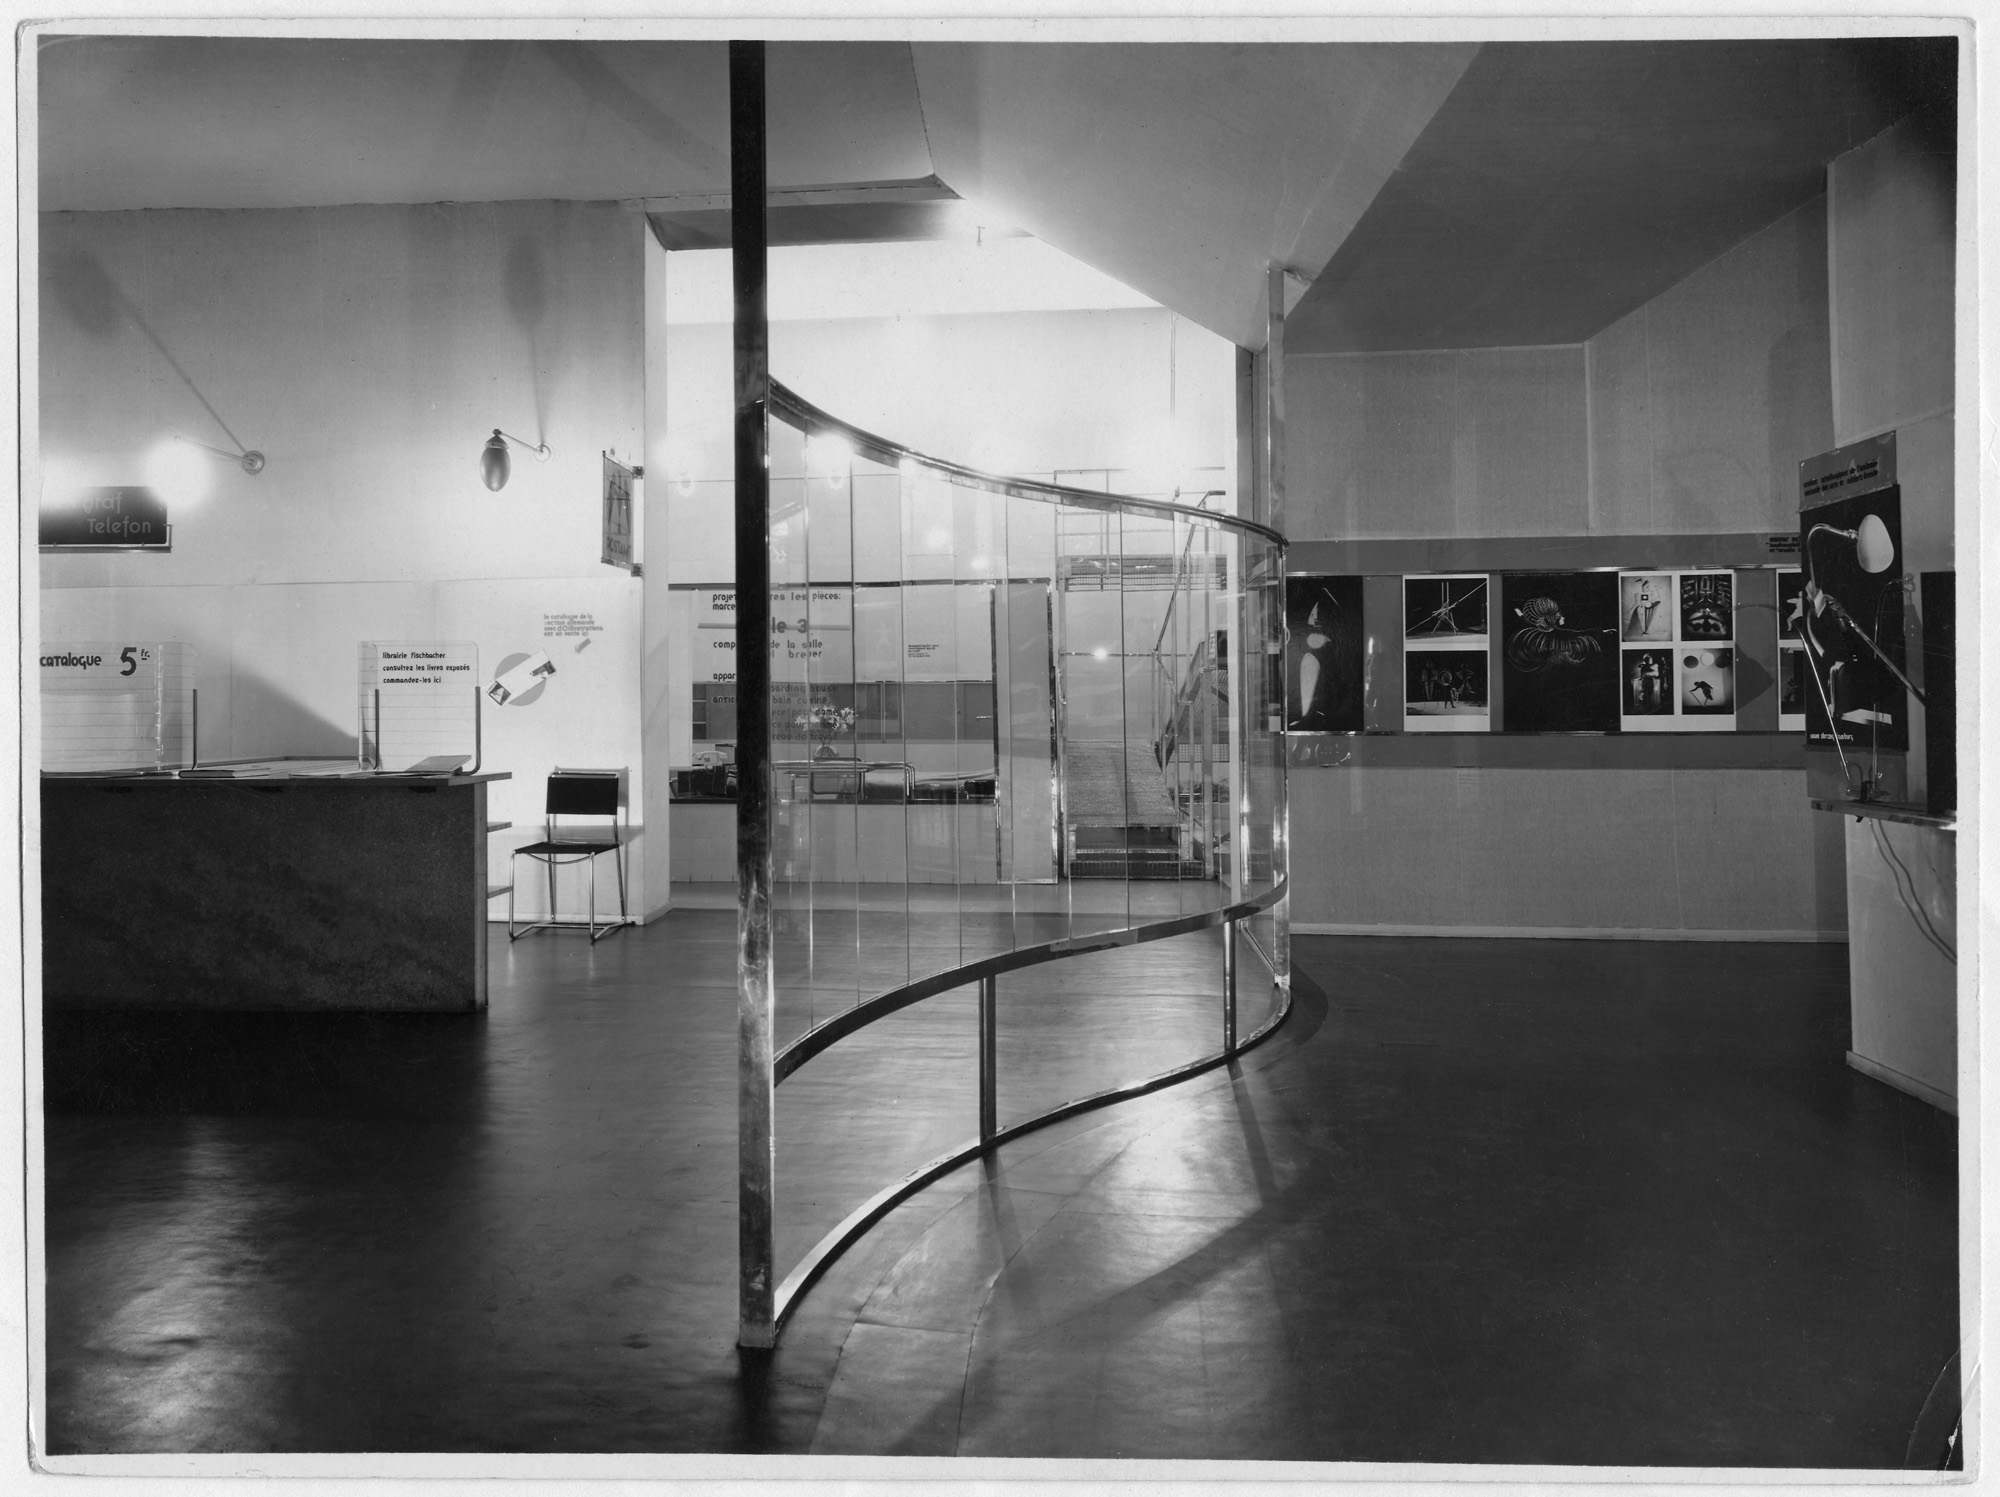 Installation view of Room 2, designed by László Moholy-Nagy, of the German section of the annual salon of the Society of Decorative Artists, Paris, May 14-July 13, 1930